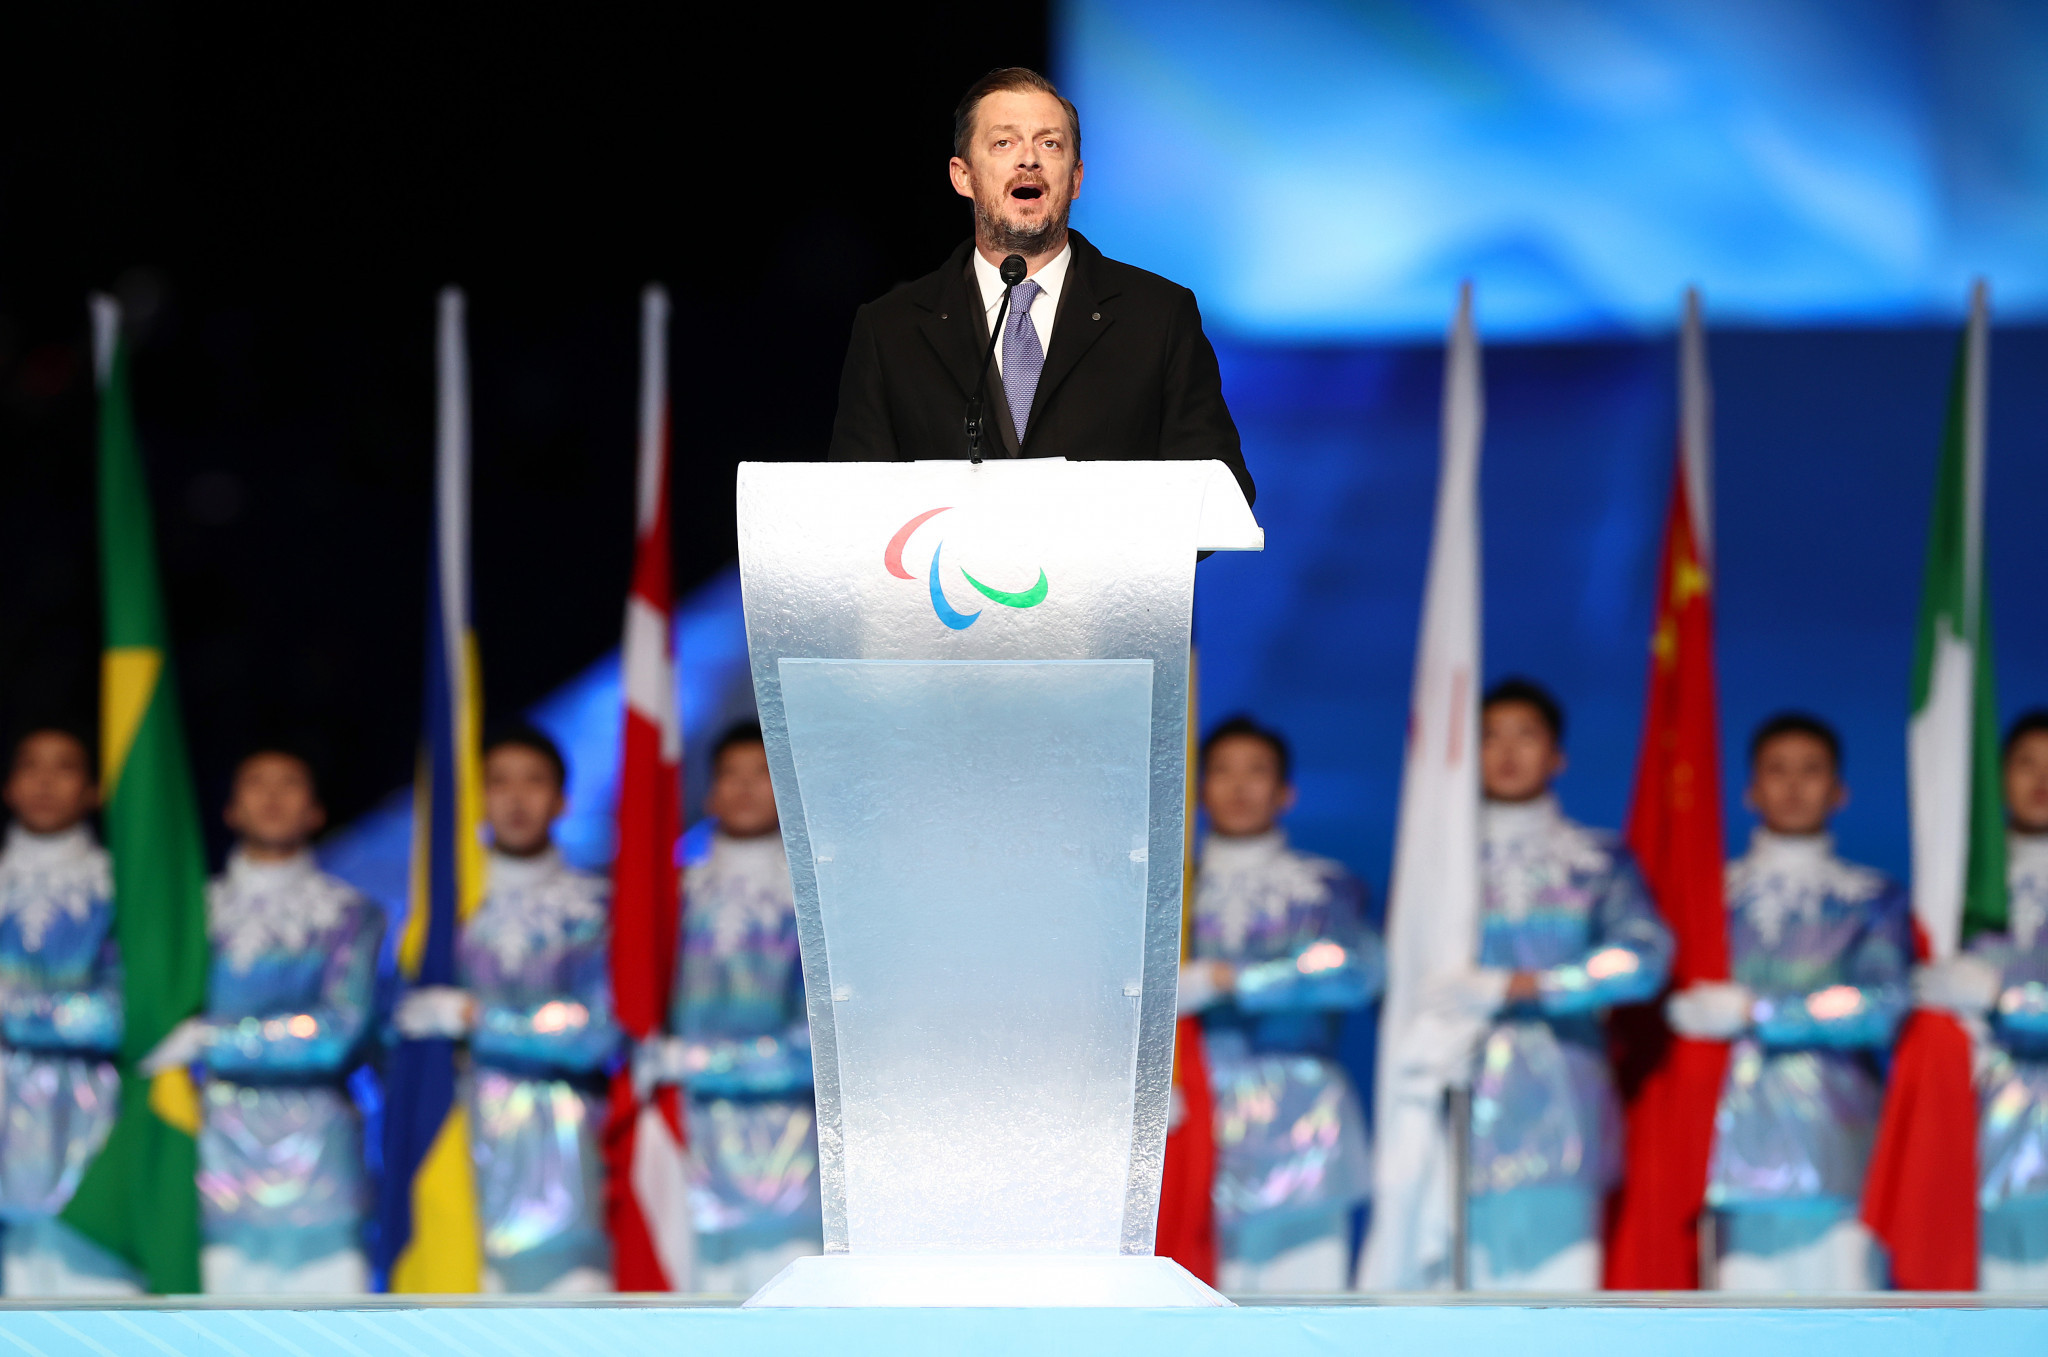 IPC President hopes COVID-19 interruptions over as focus turns to Paris 2024